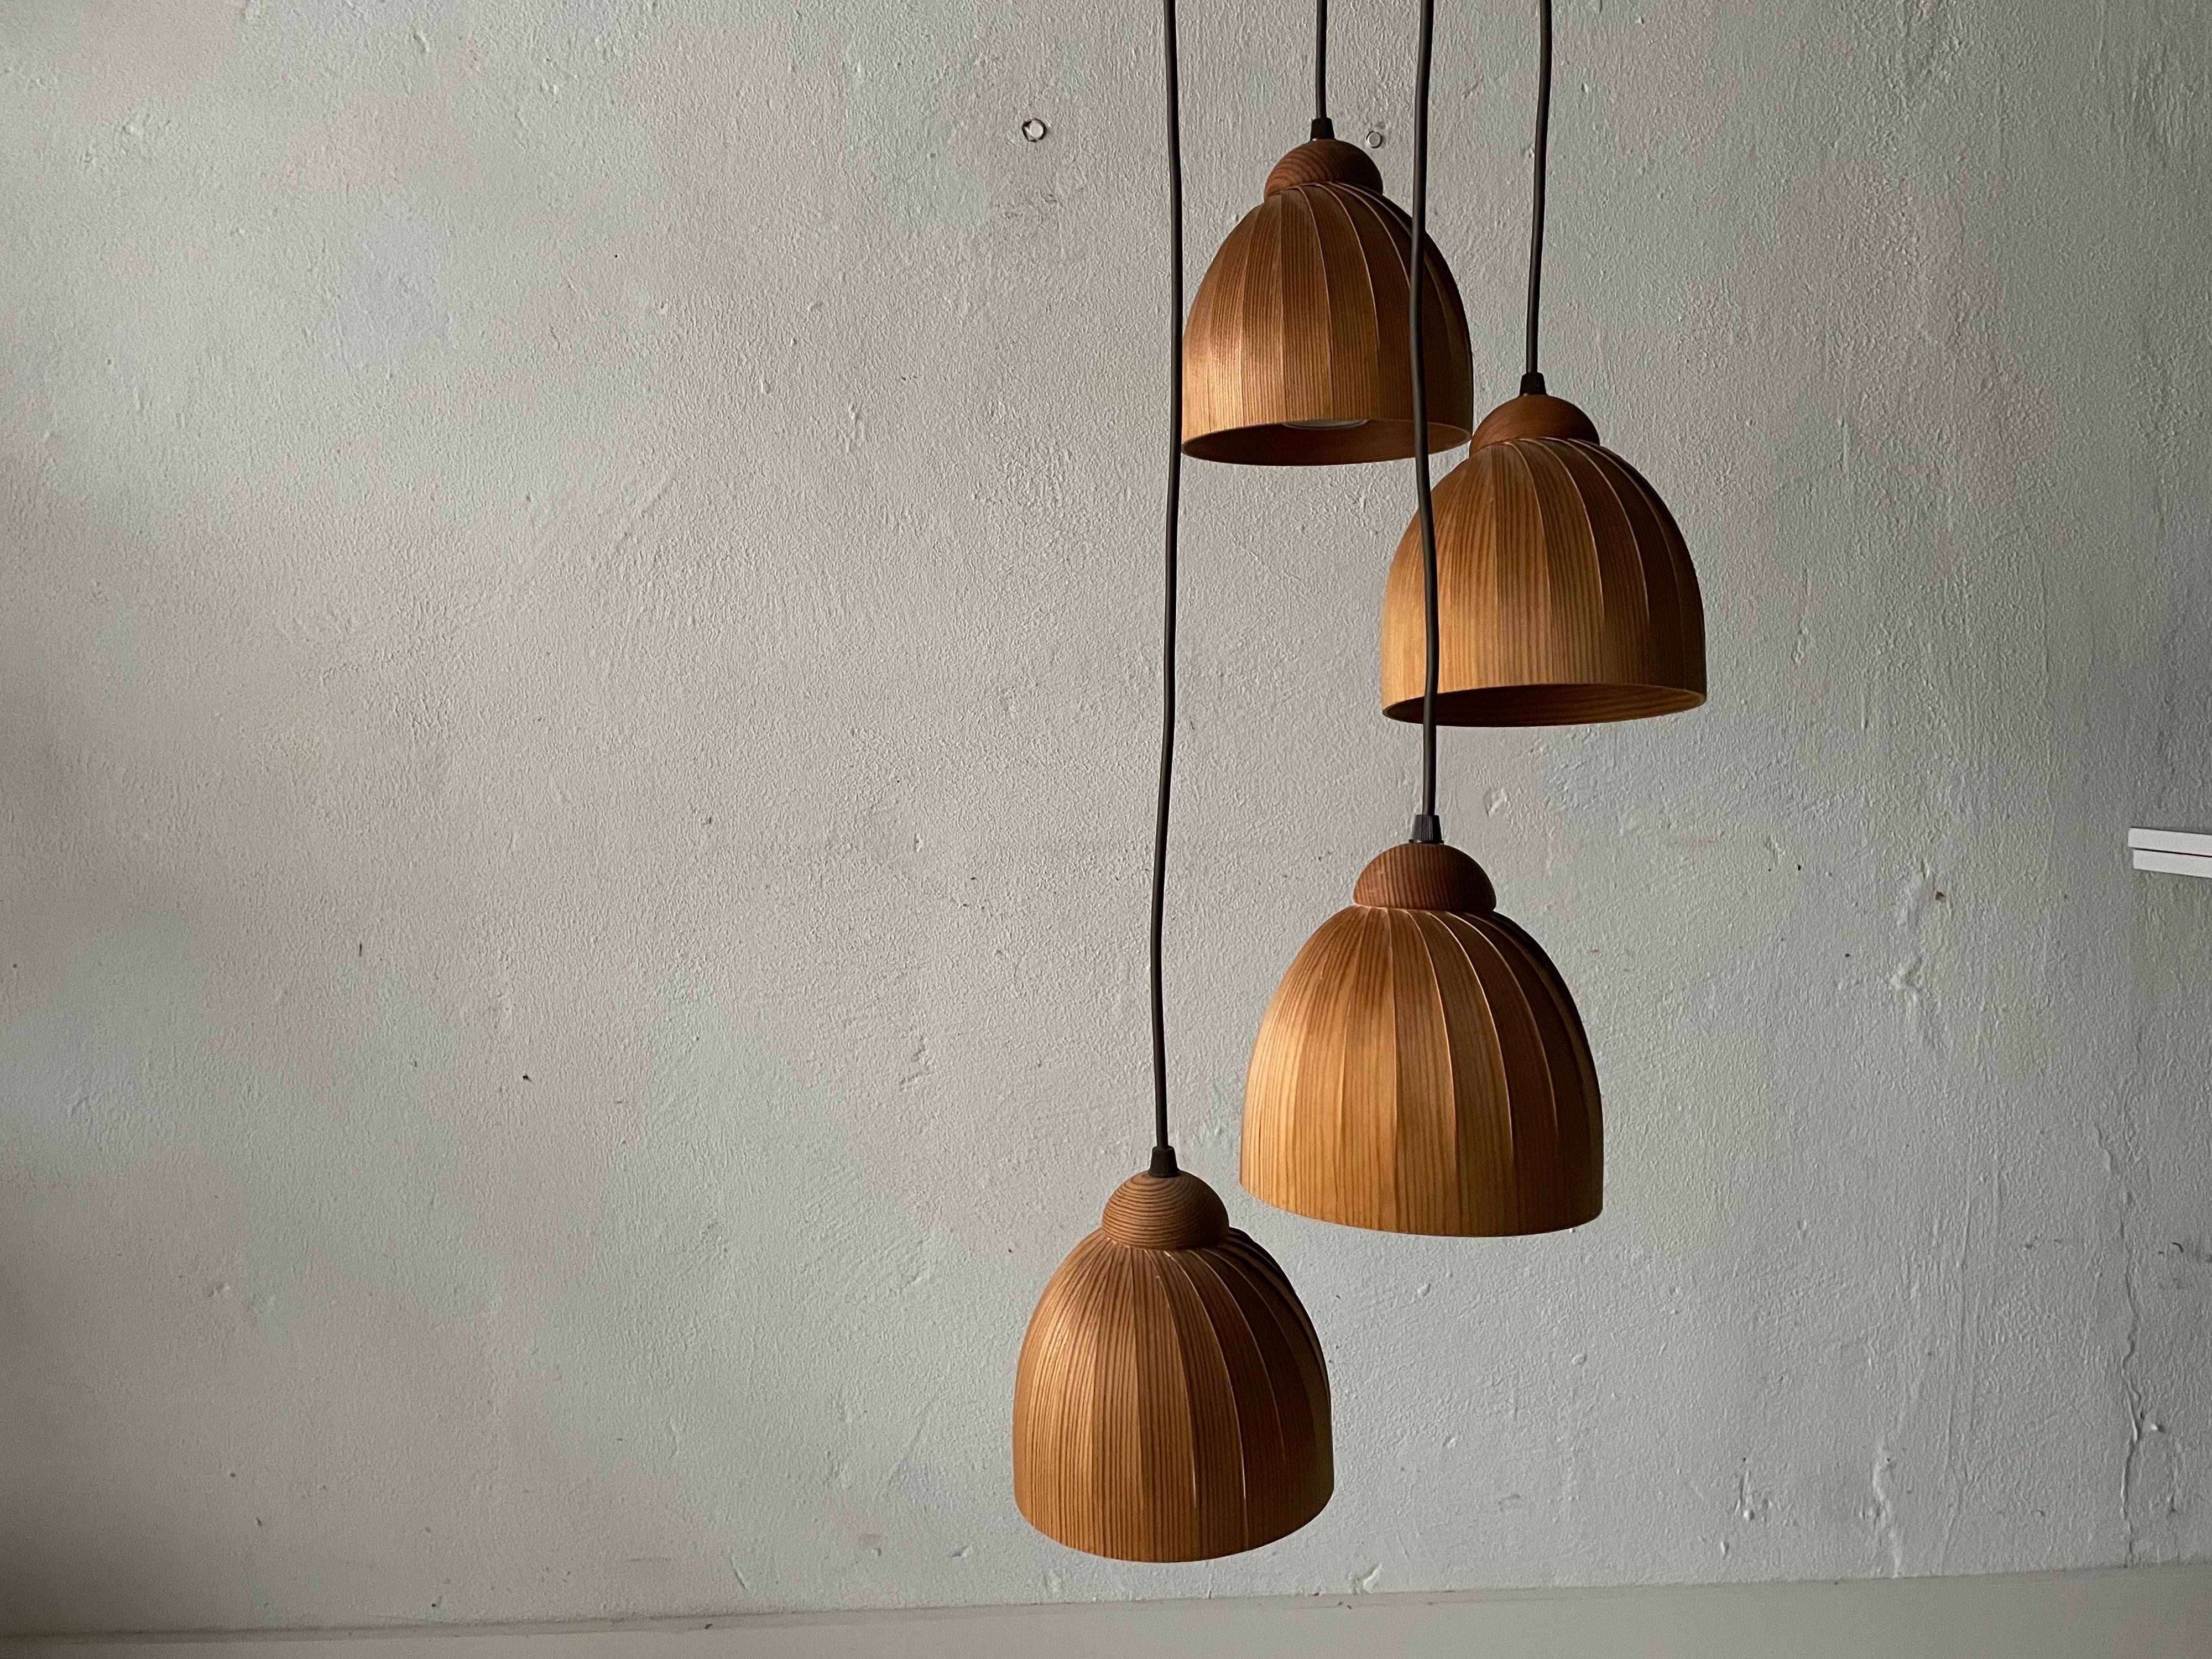 Cascade Pendant Lamp by Hans-Agne Jakobsson for AB Ellysett Markaryd, 1960s, Sweden

Lampshade is in very good vintage condition.

This lamp works with 4xE14 light bulbs. 
Wired and suitable to use with 220V and 110V for all